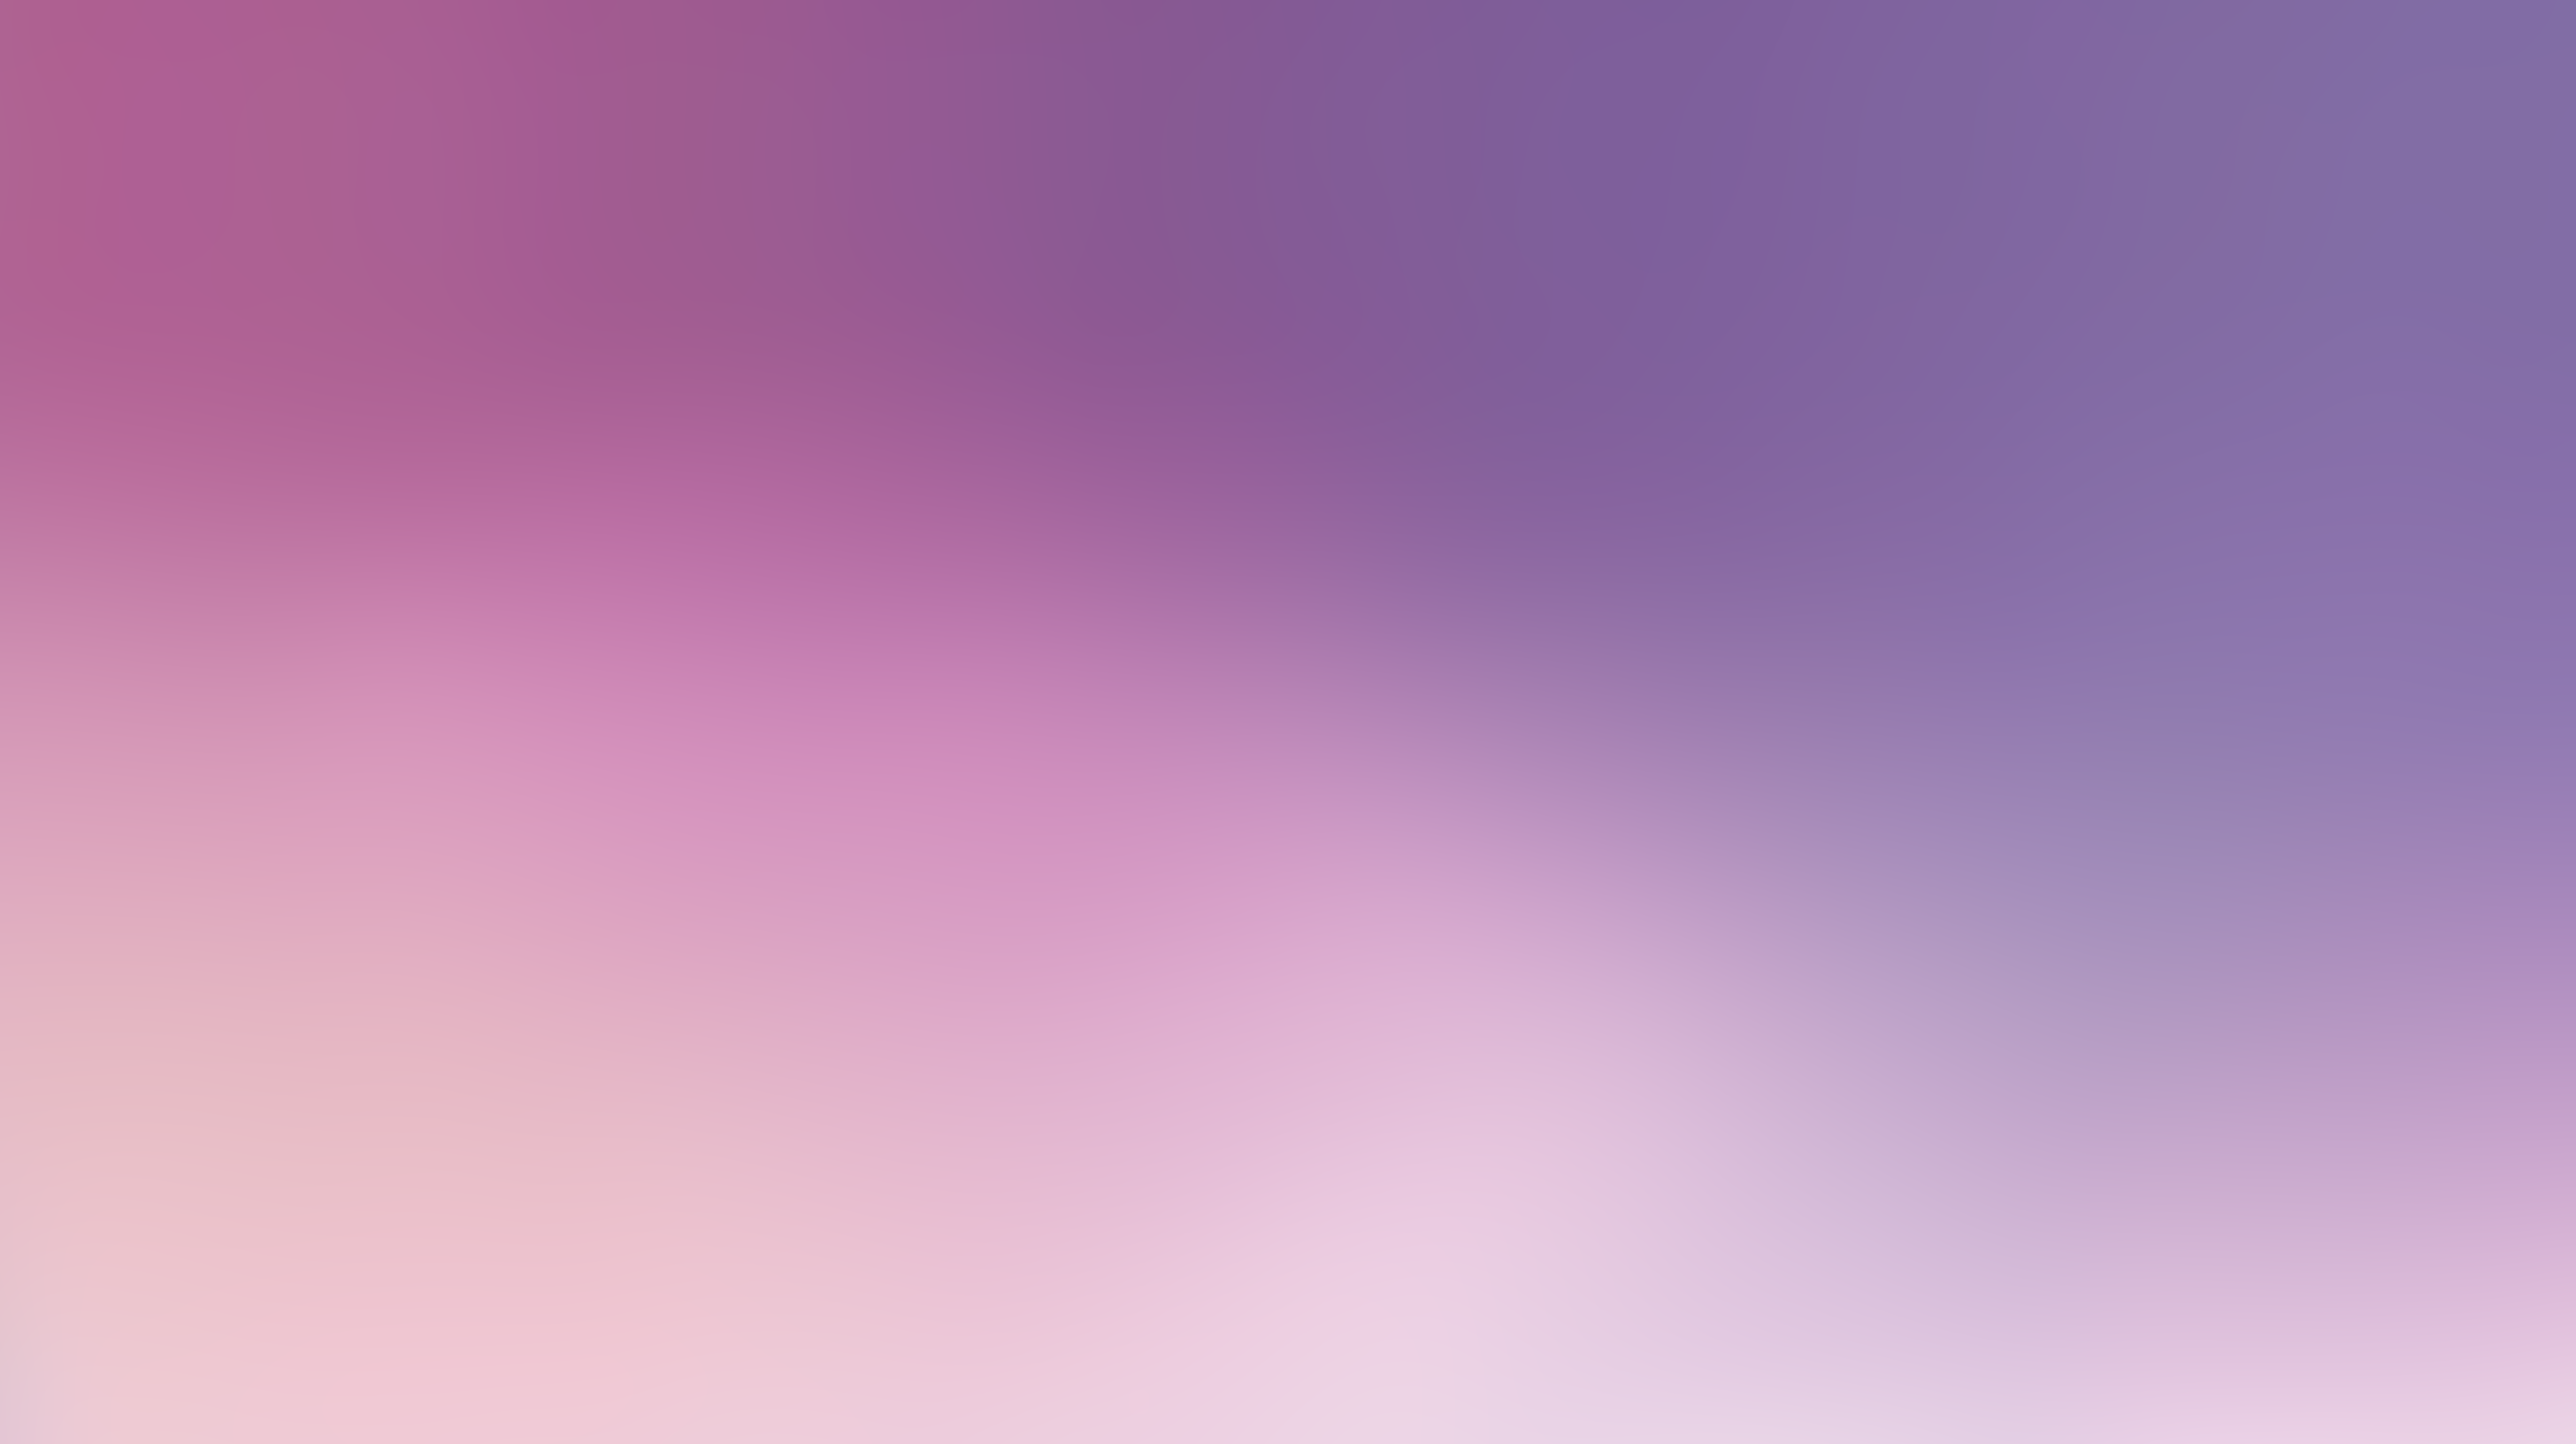 Purple,pink,voilet and peach soft background,abstract color light